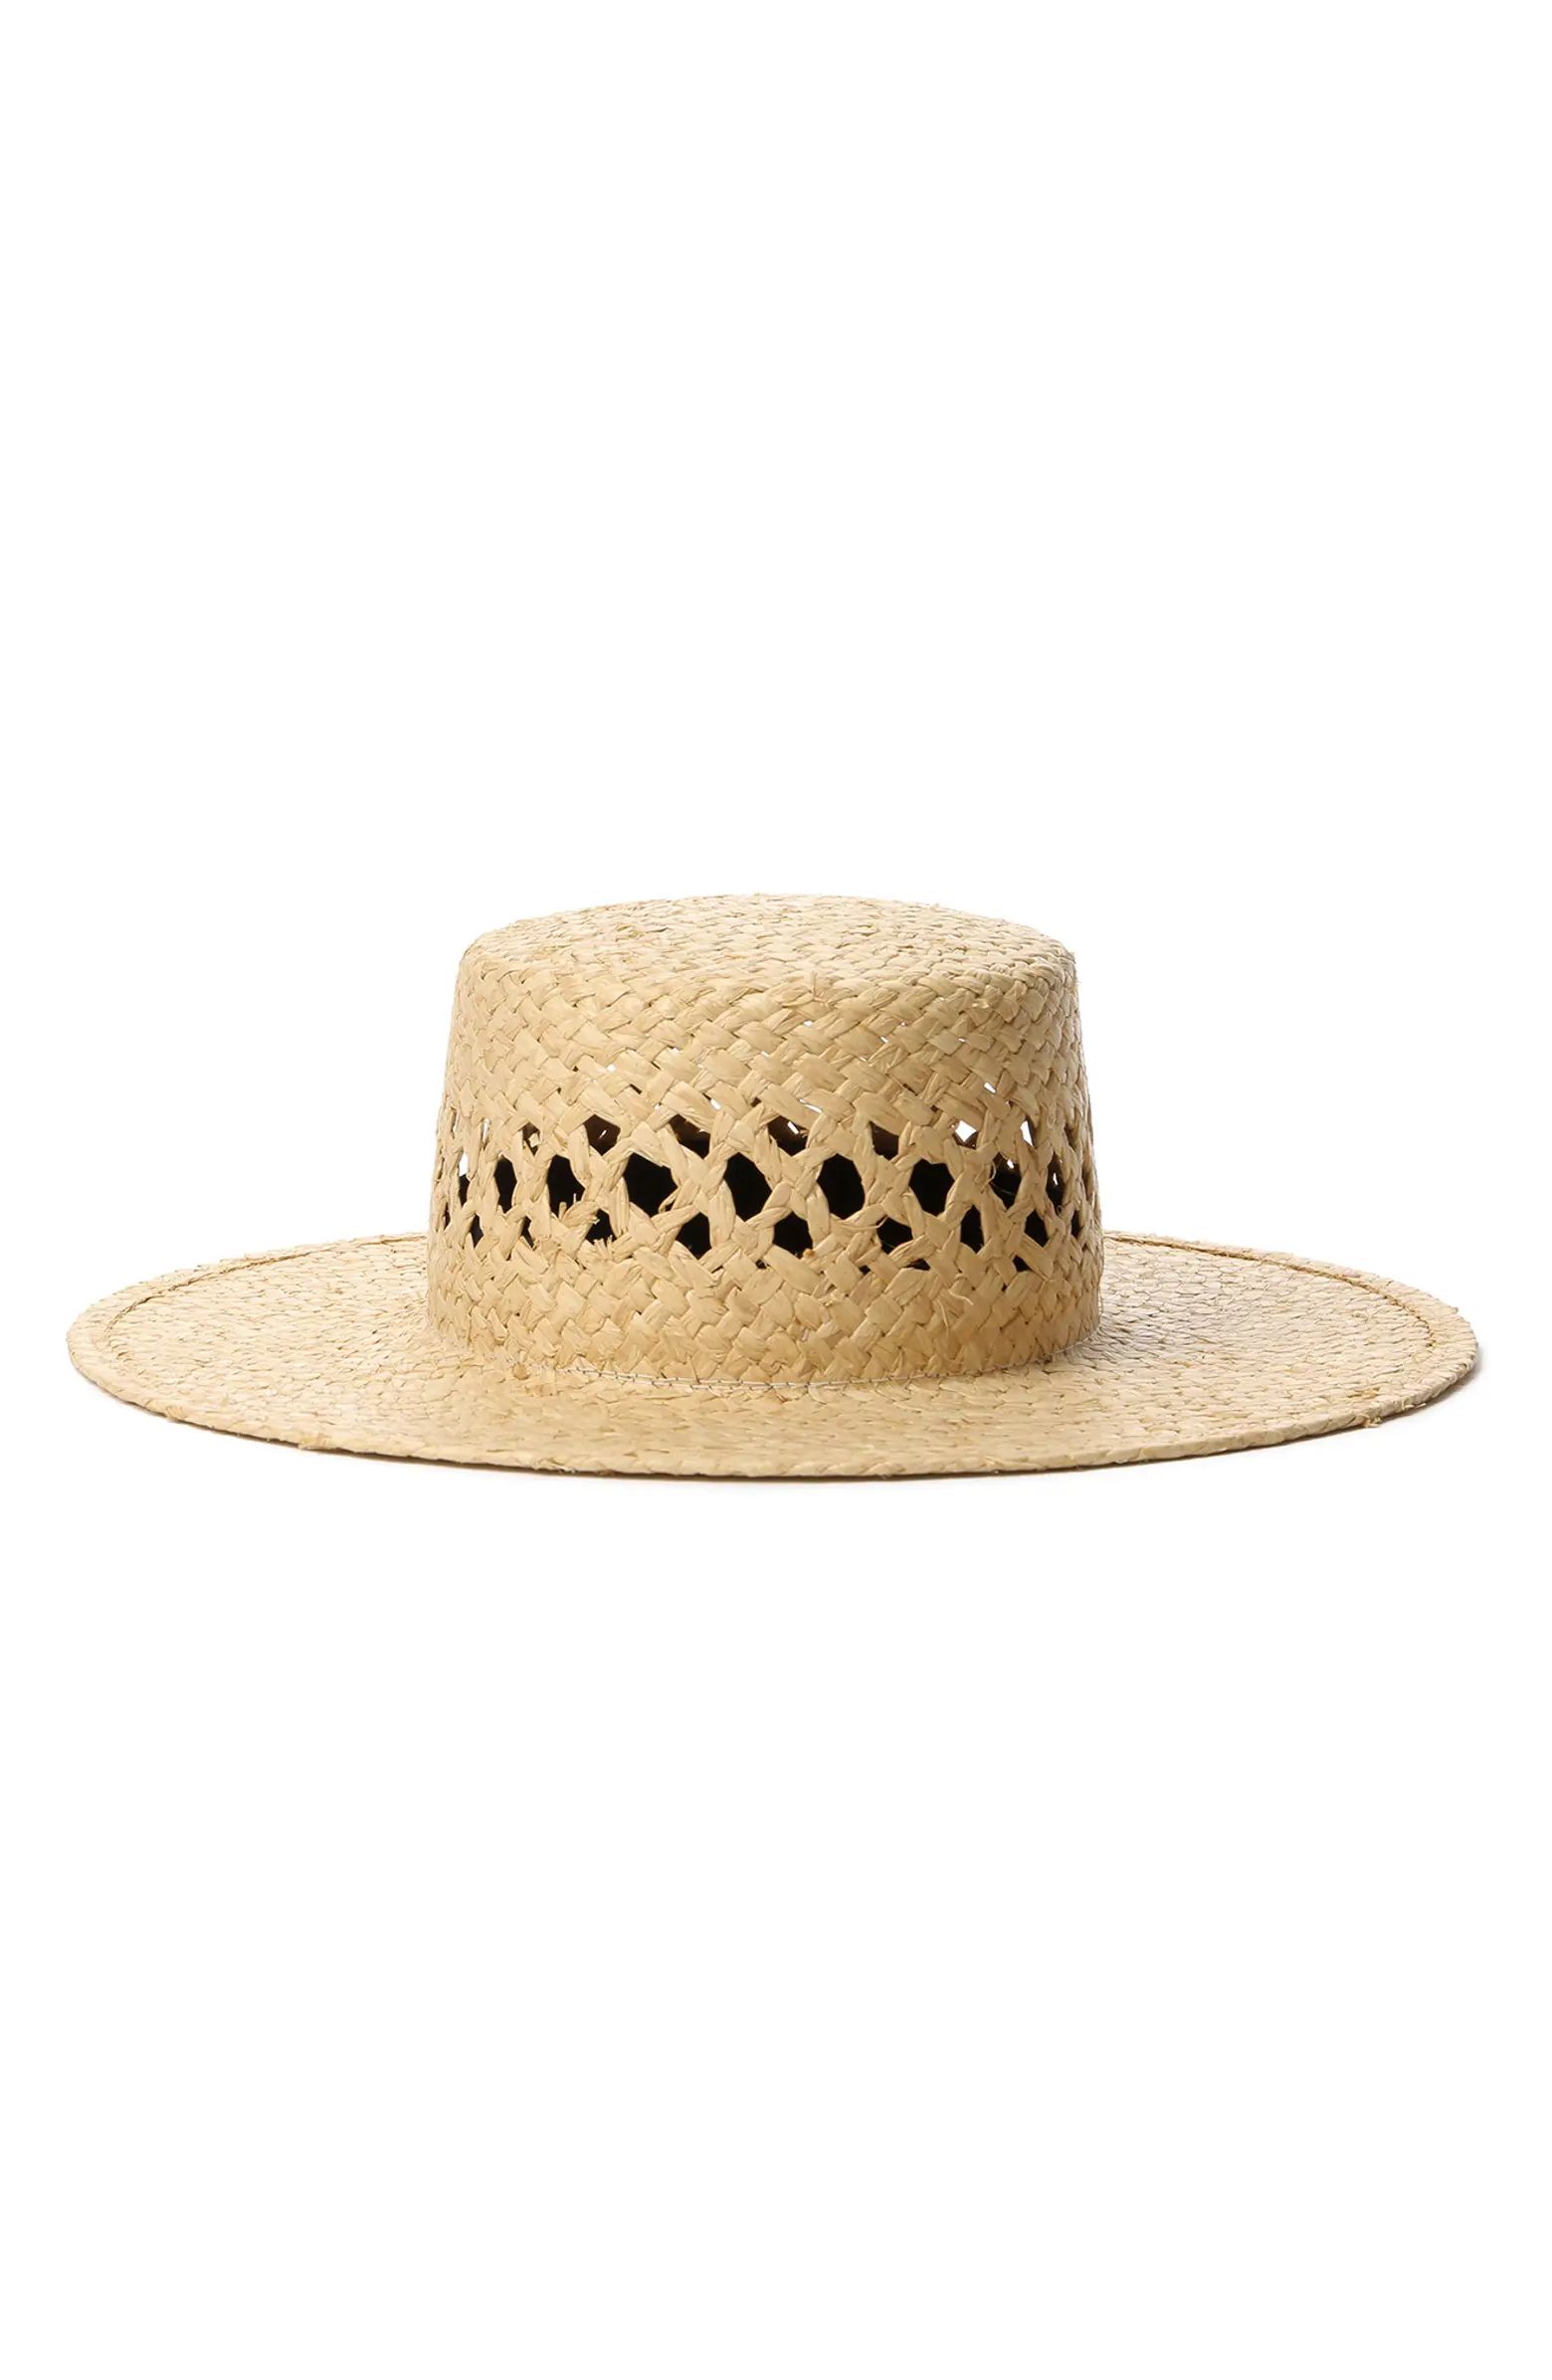 Shaw Straw Boater Hat | Nordstrom